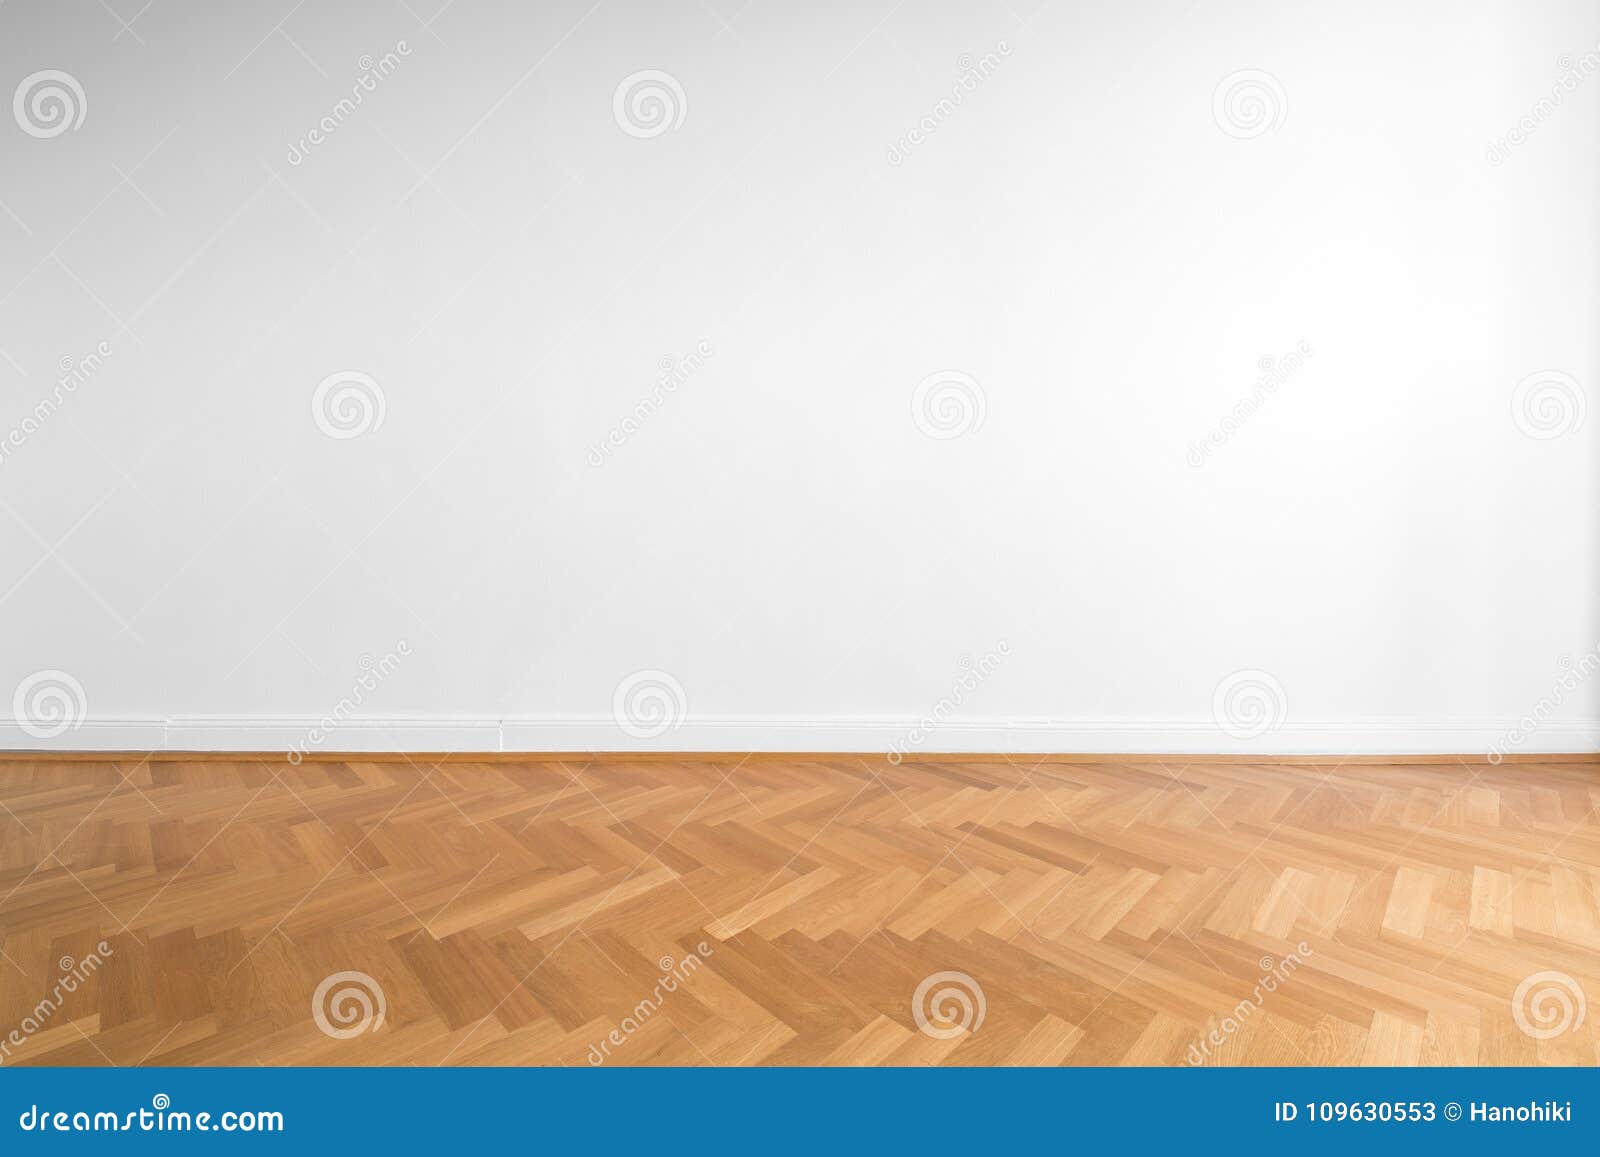 wooden parquet floor and white wall background - empty room , ne